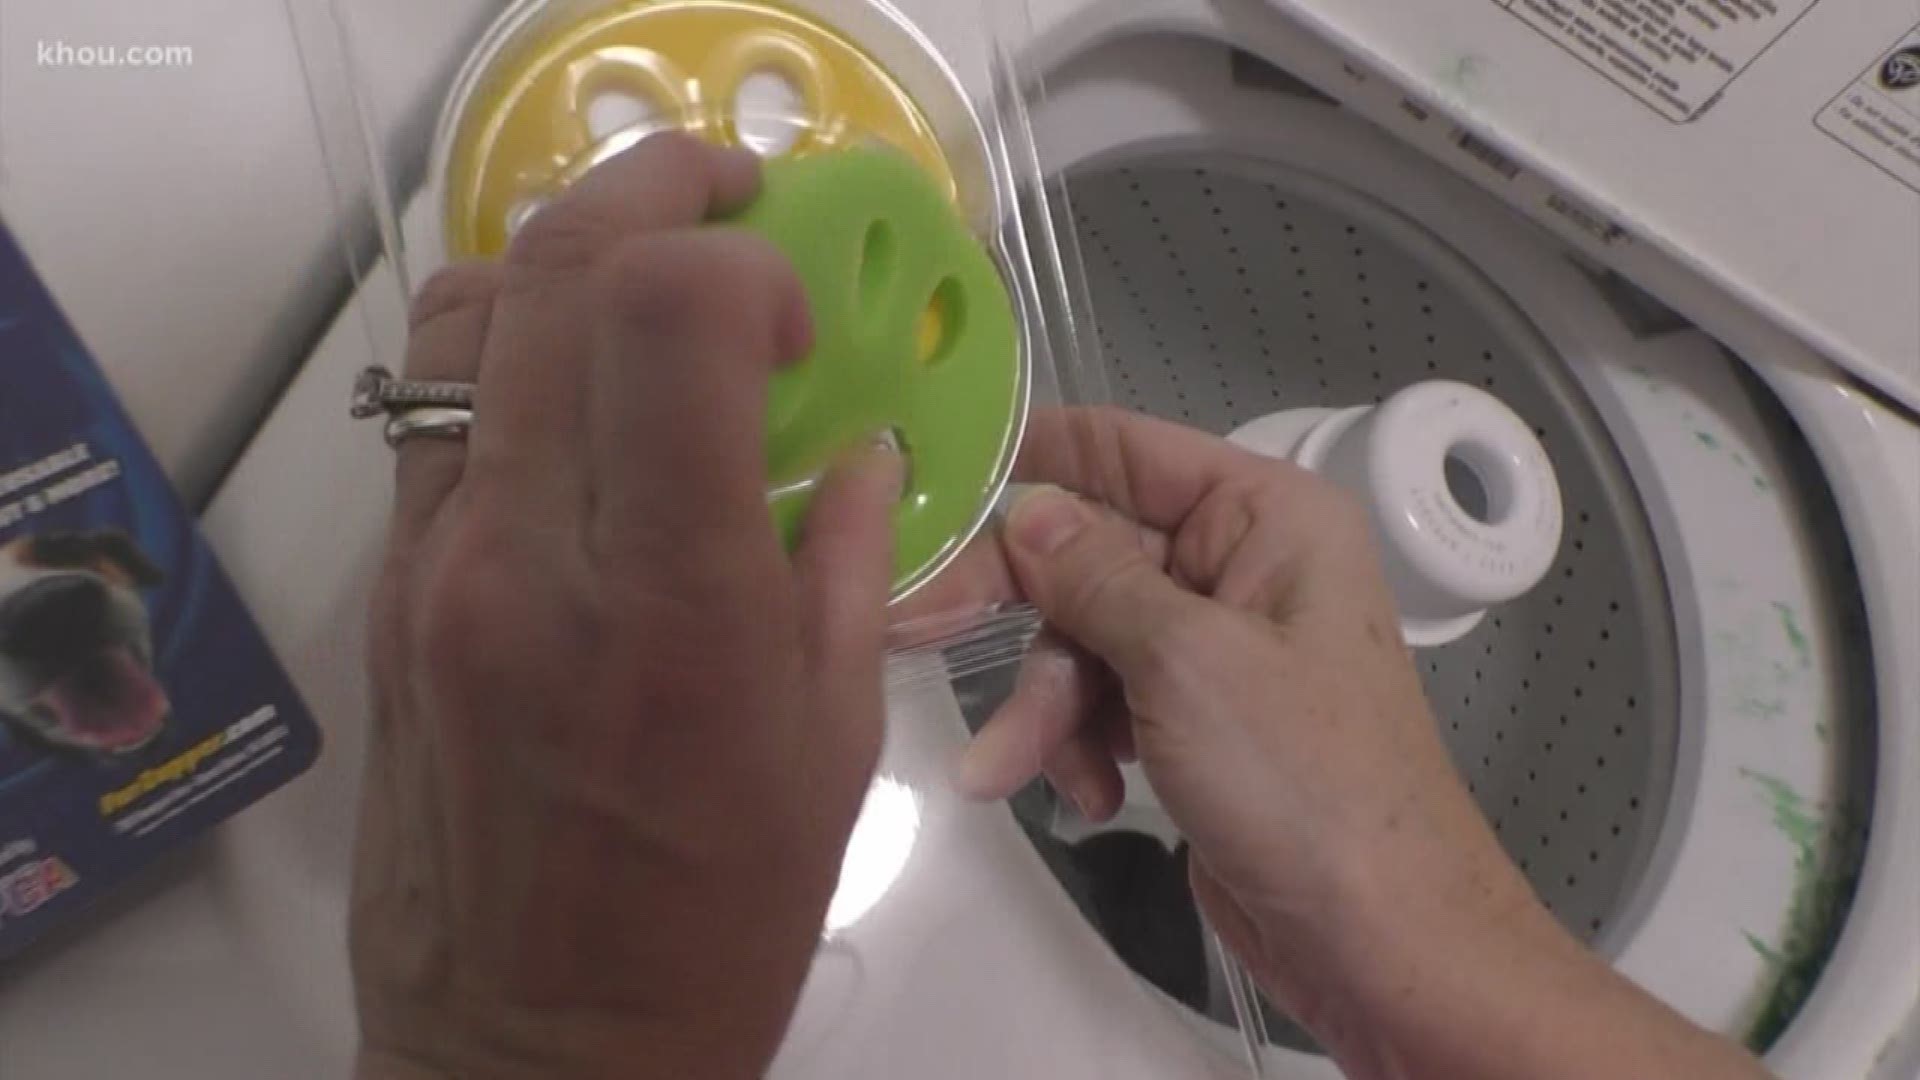 The sticky FurZapper attracts pet fur, hair, lint and dander. And it works in the washer and dryer.

Link to FurZapper https://amzn.to/39pZxPS